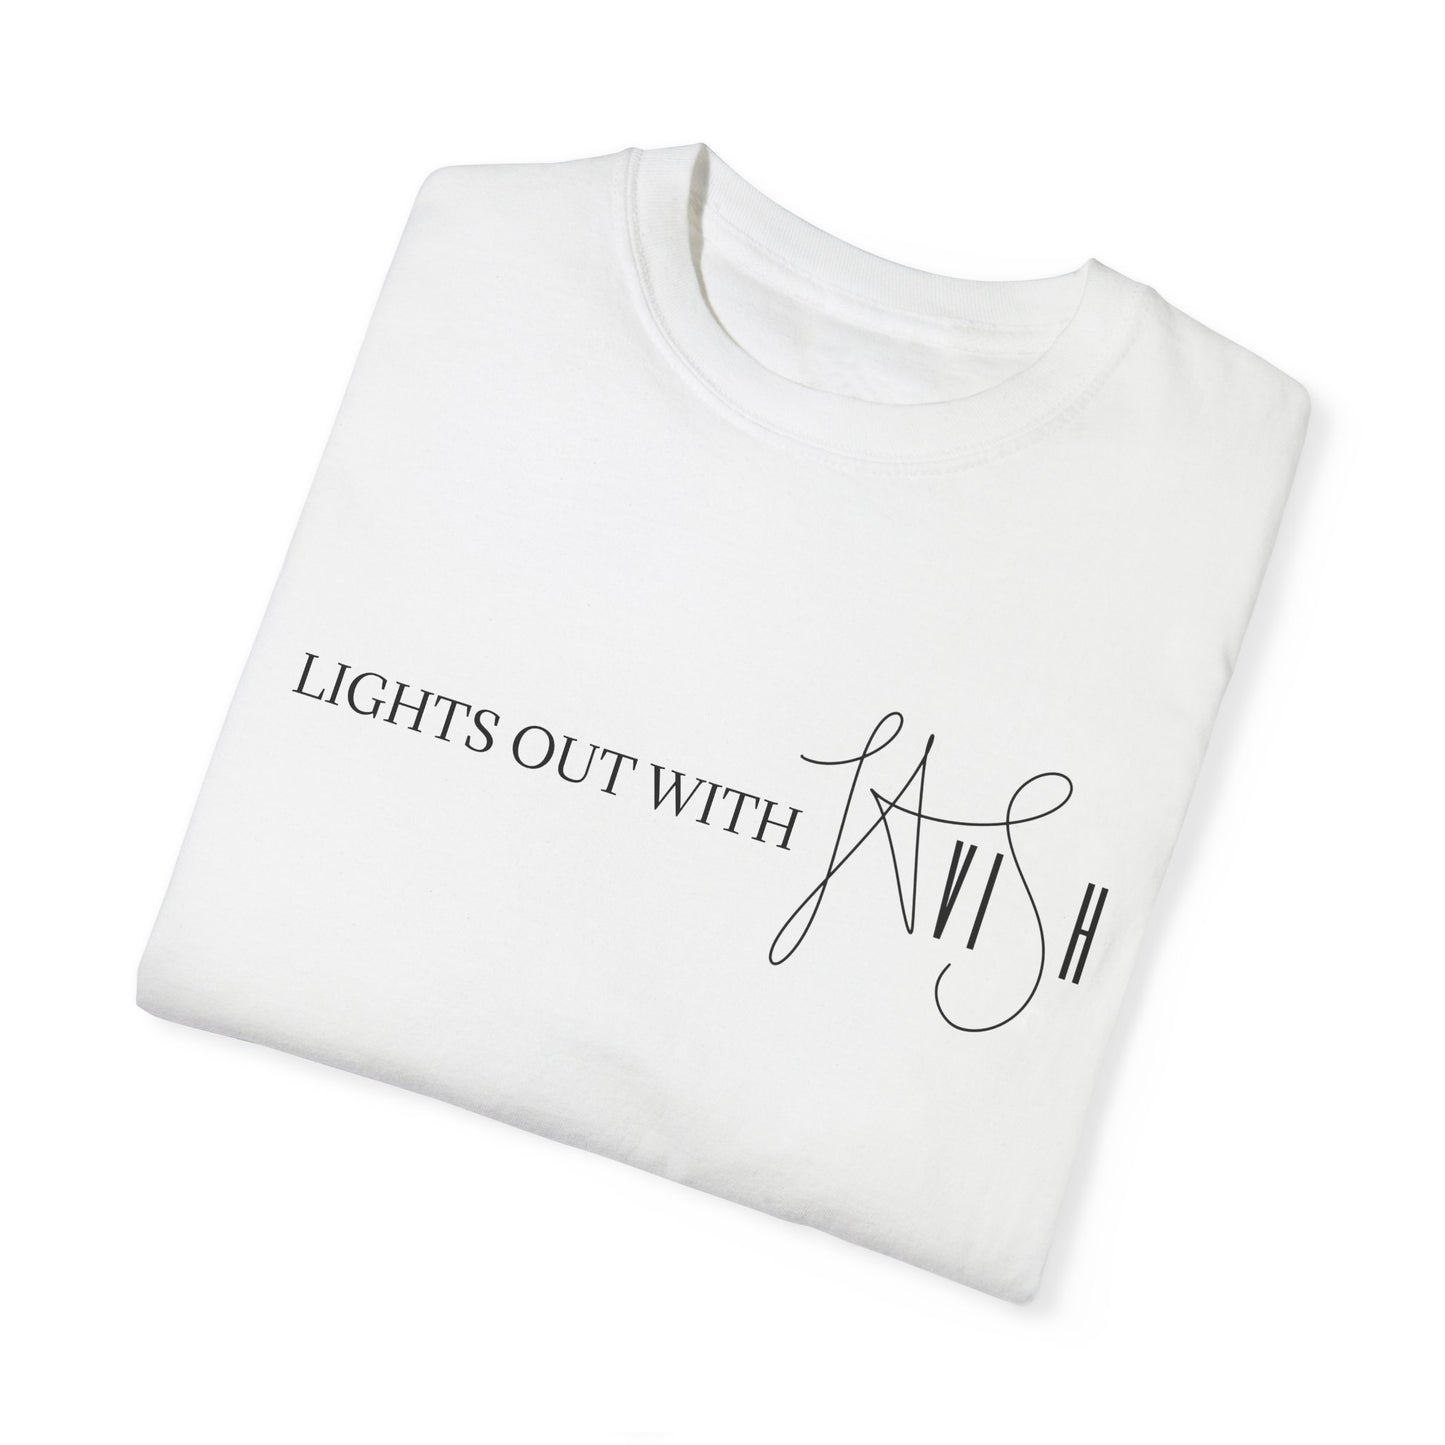 Lights Out With Lavish By LauLau T-shirt